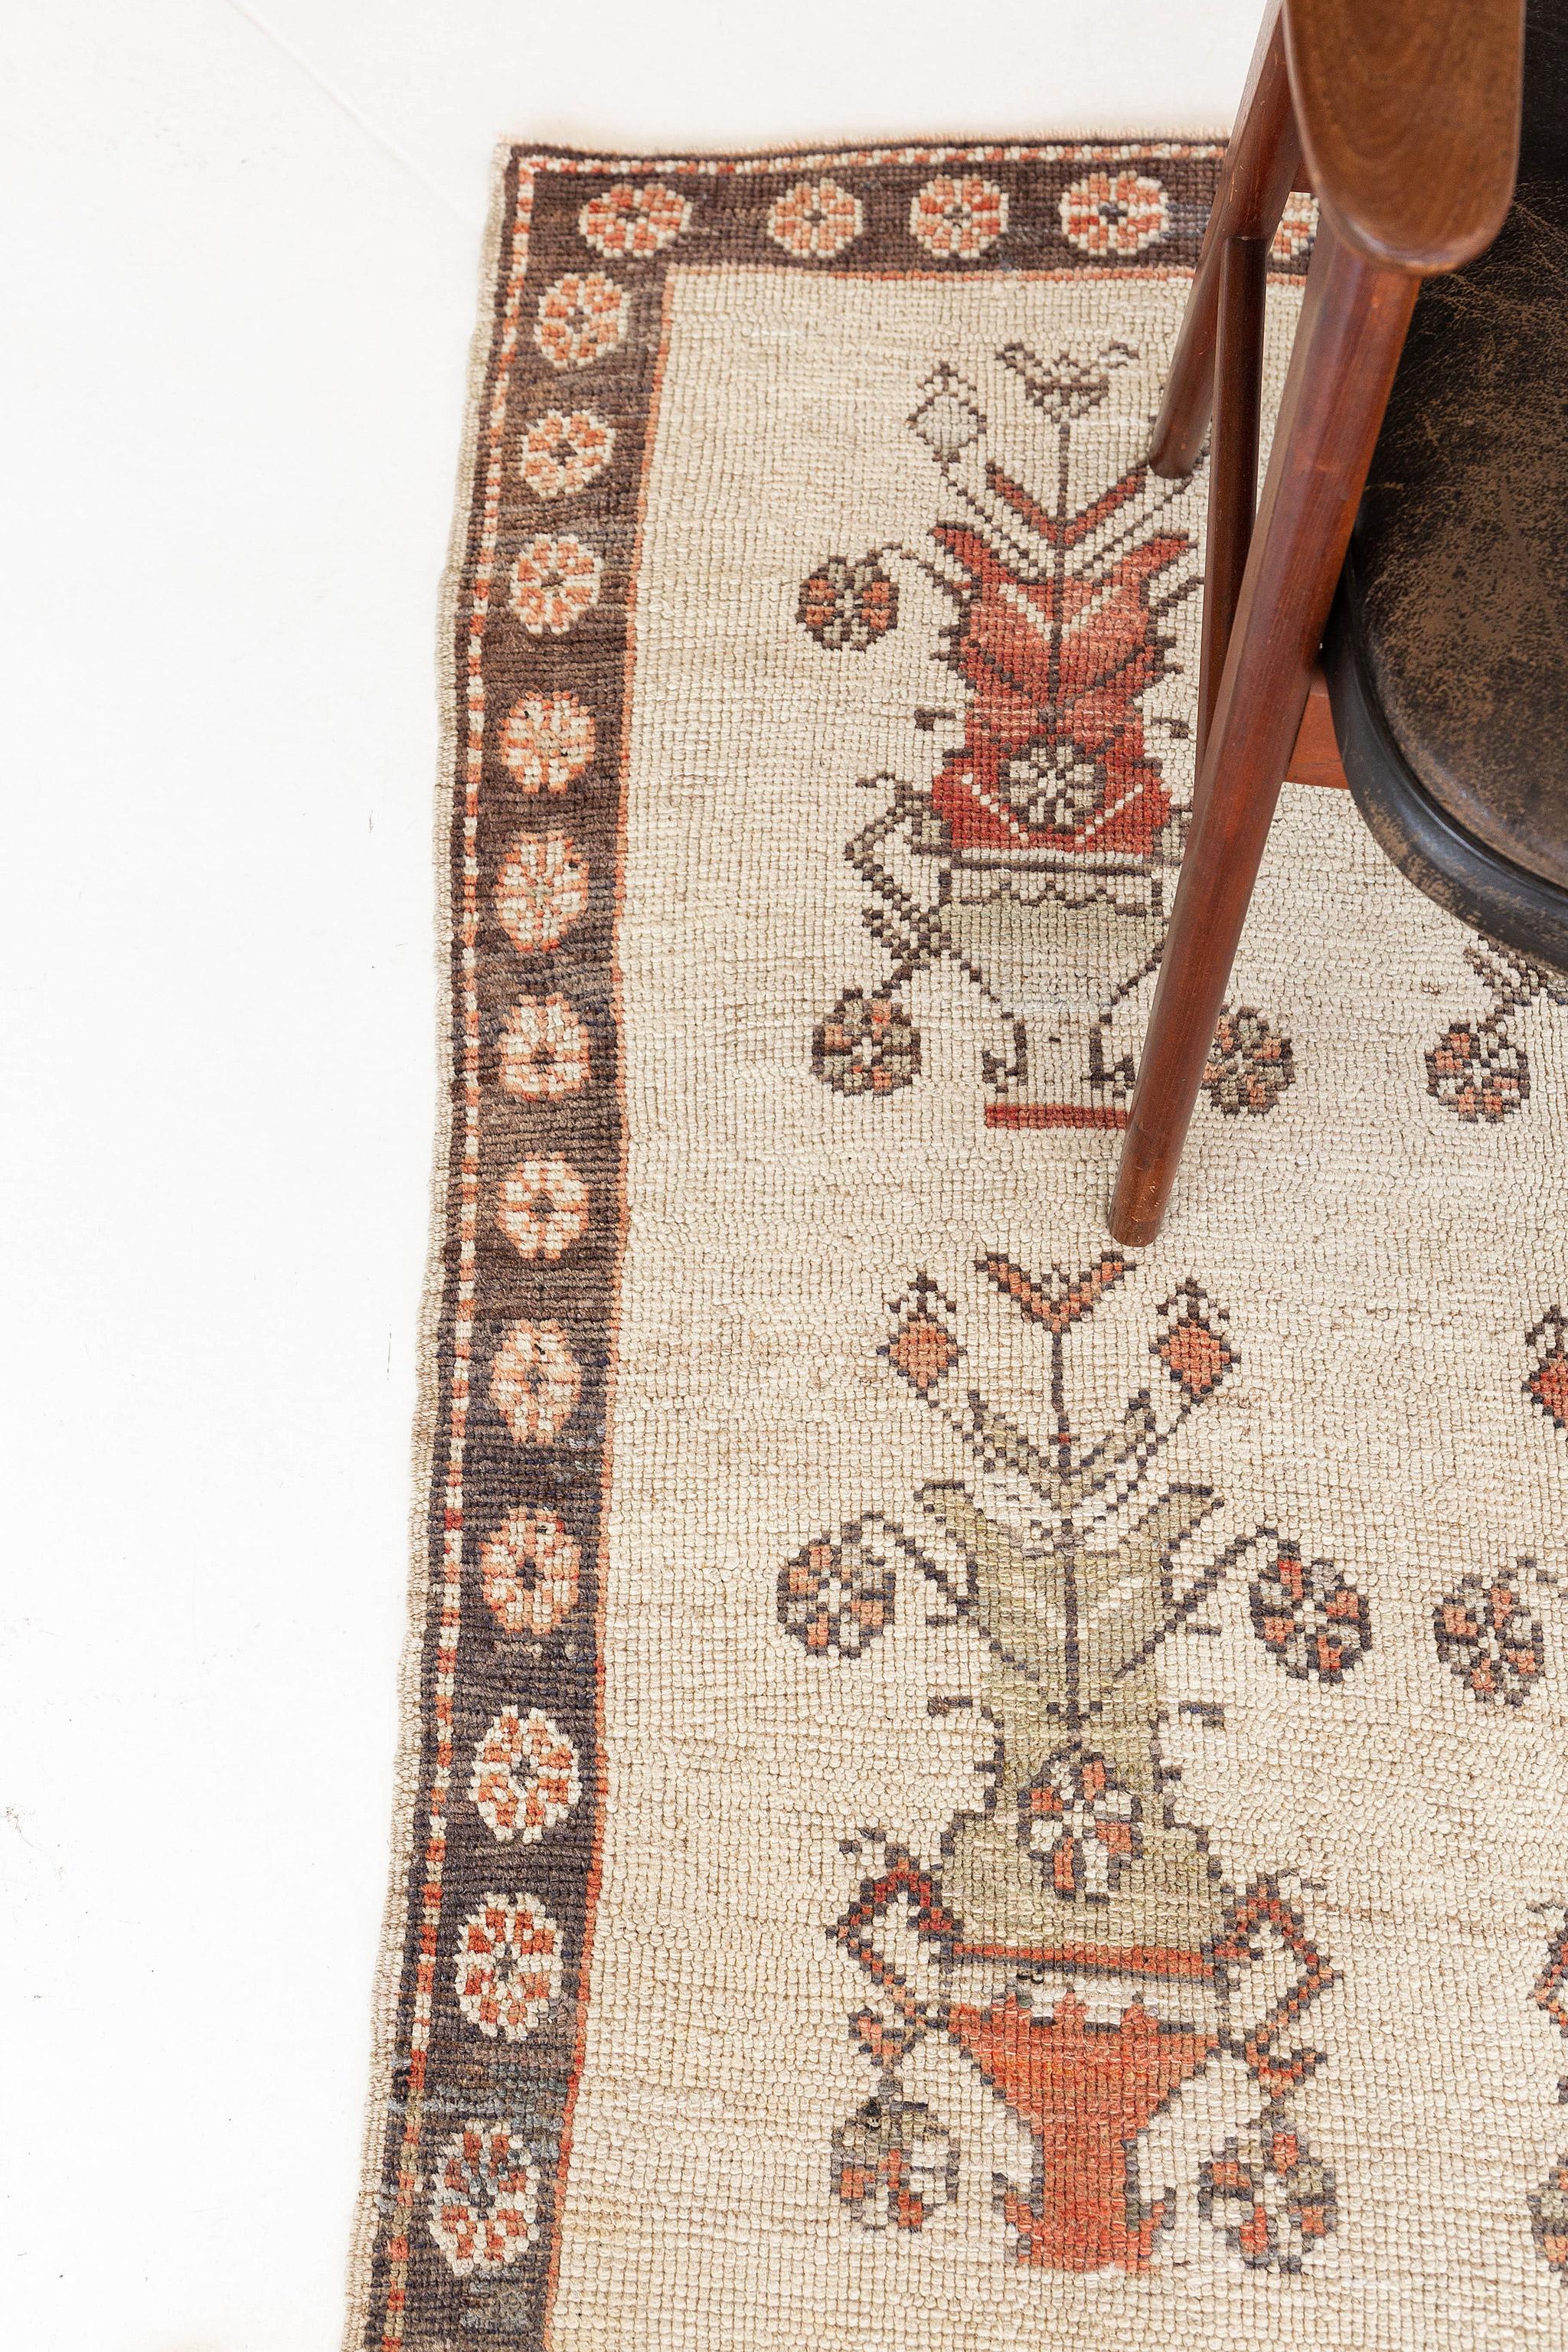 A majestic Vintage Turkish Anatolian Rug that has a Classic and timeless pattern. Featuring the collaboration of vibrant tone in terracotta and the magnificent colour palette consisting of ecru and umber brown, this elegant rug is composed with